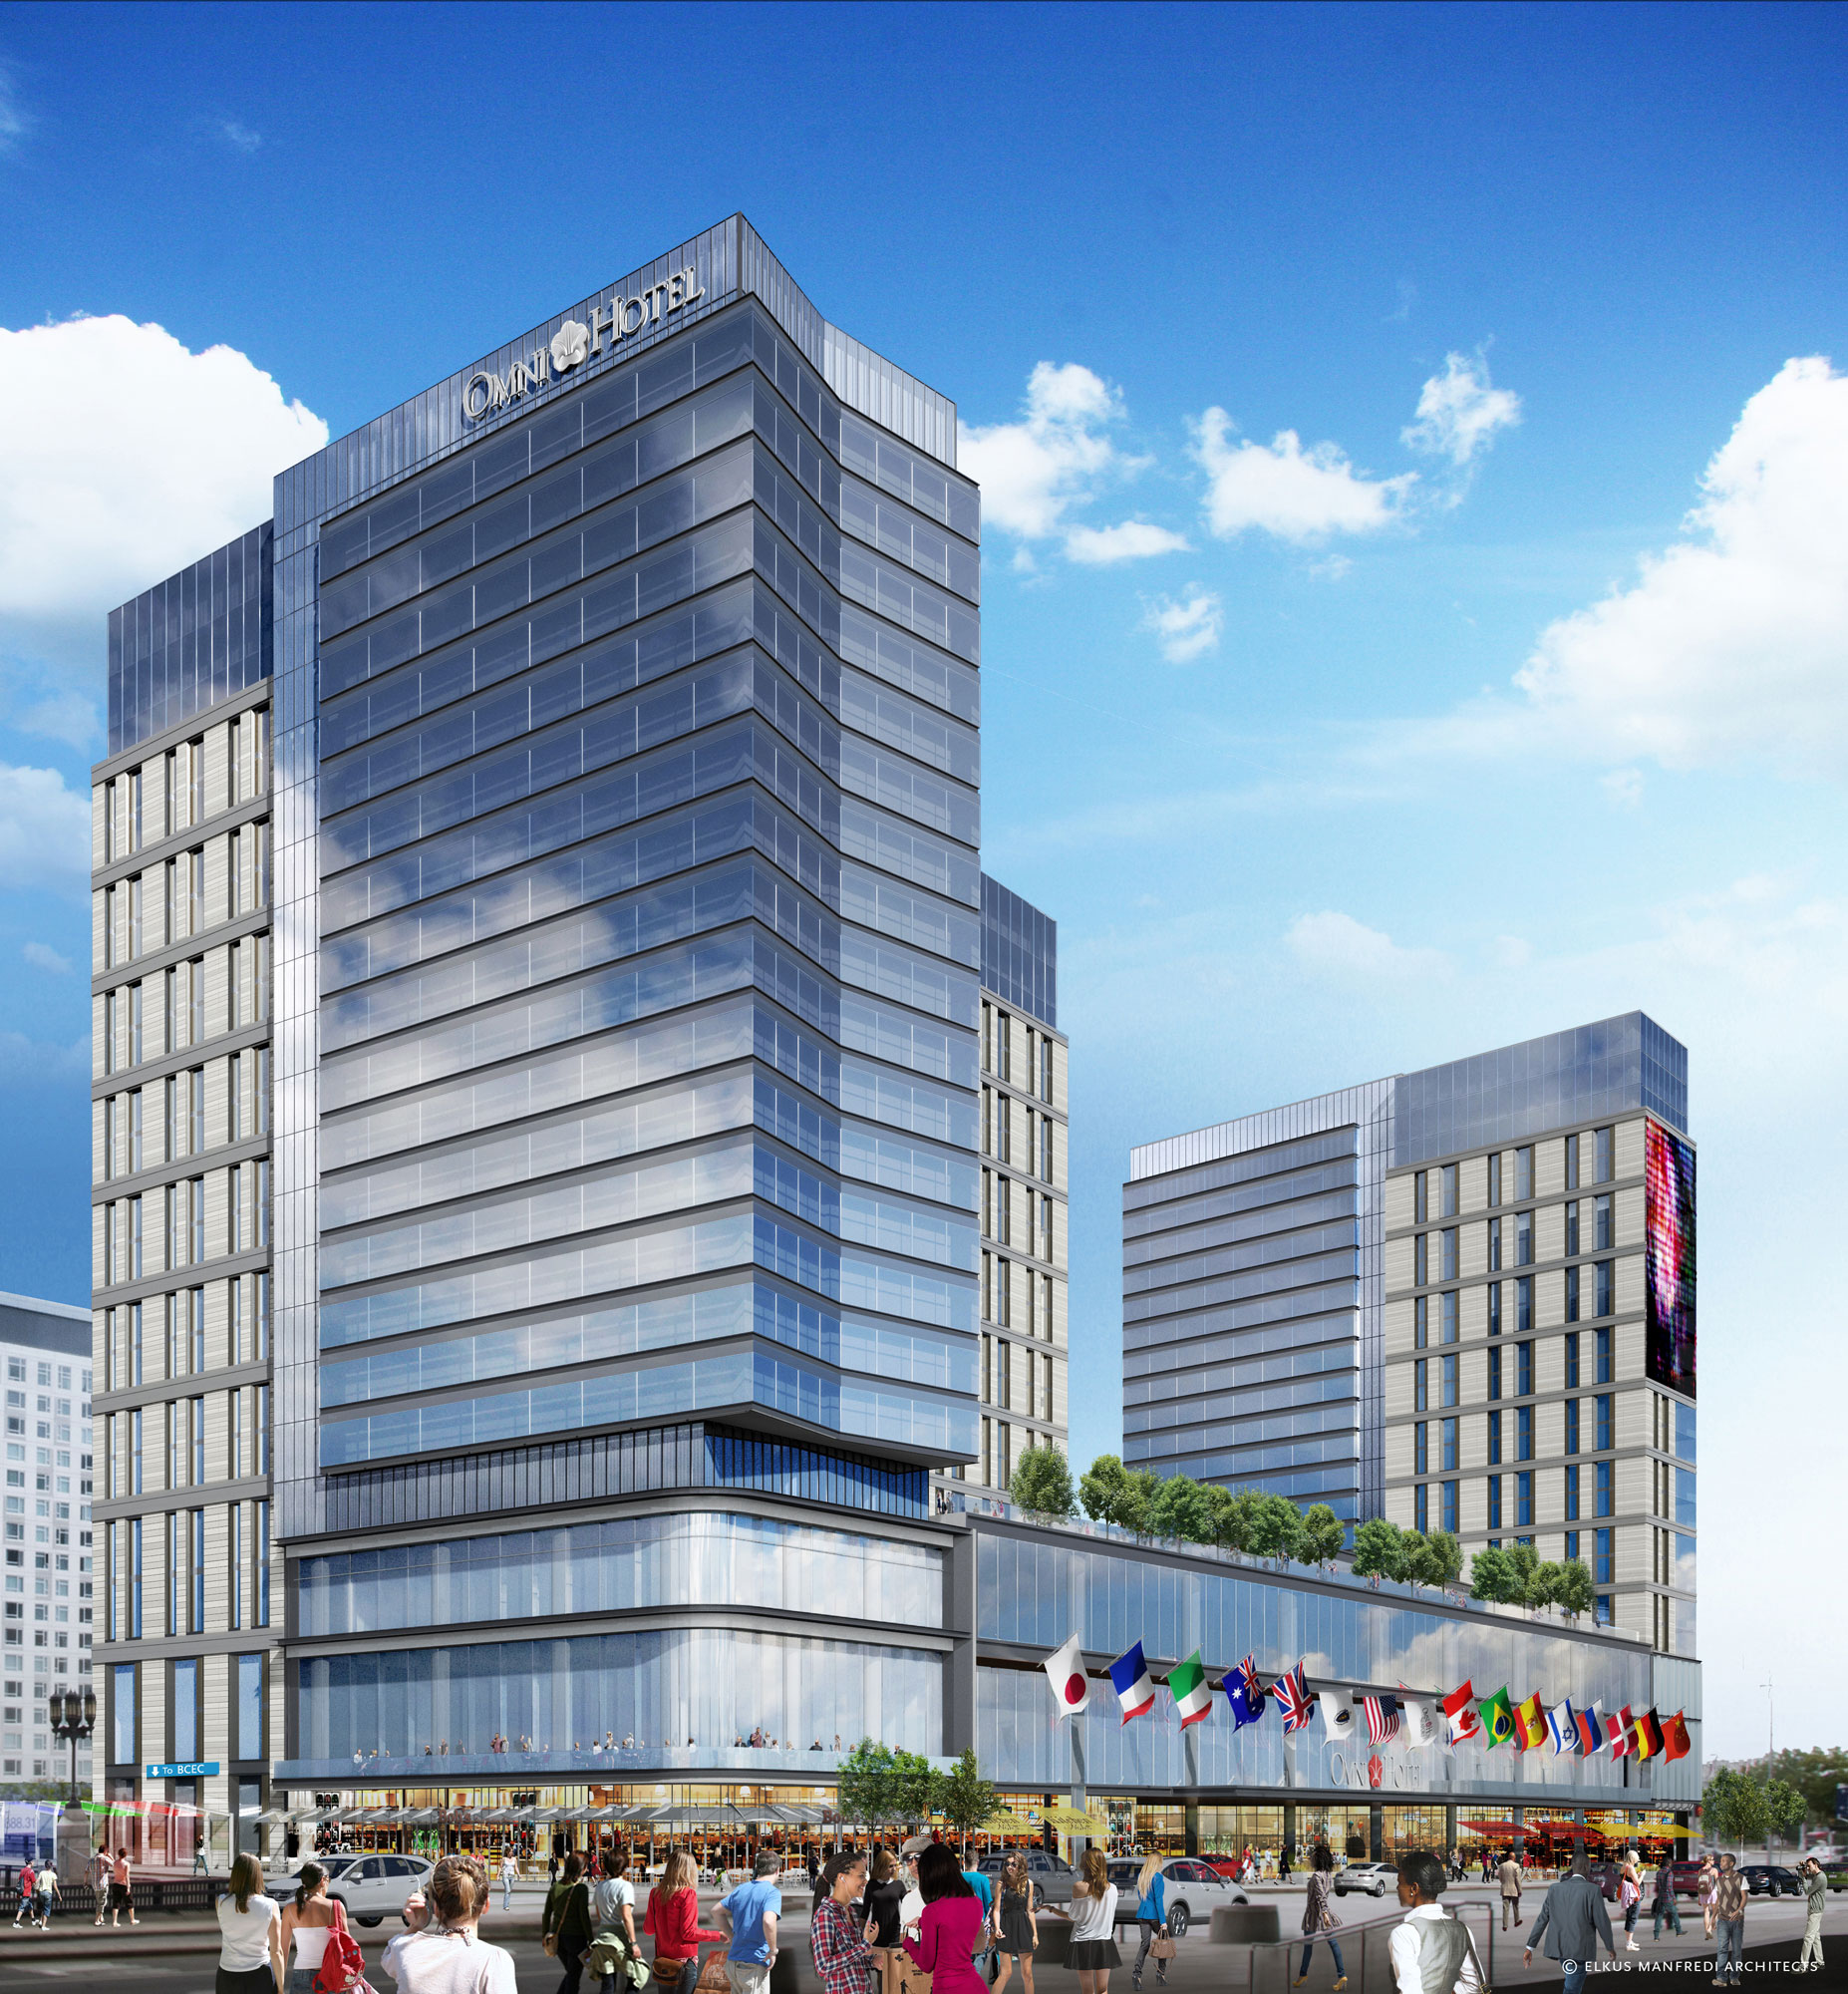 Set to open in late 2020 the Omni Boston Seaport Hotel will consist of 1055guestrooms across 21 floors